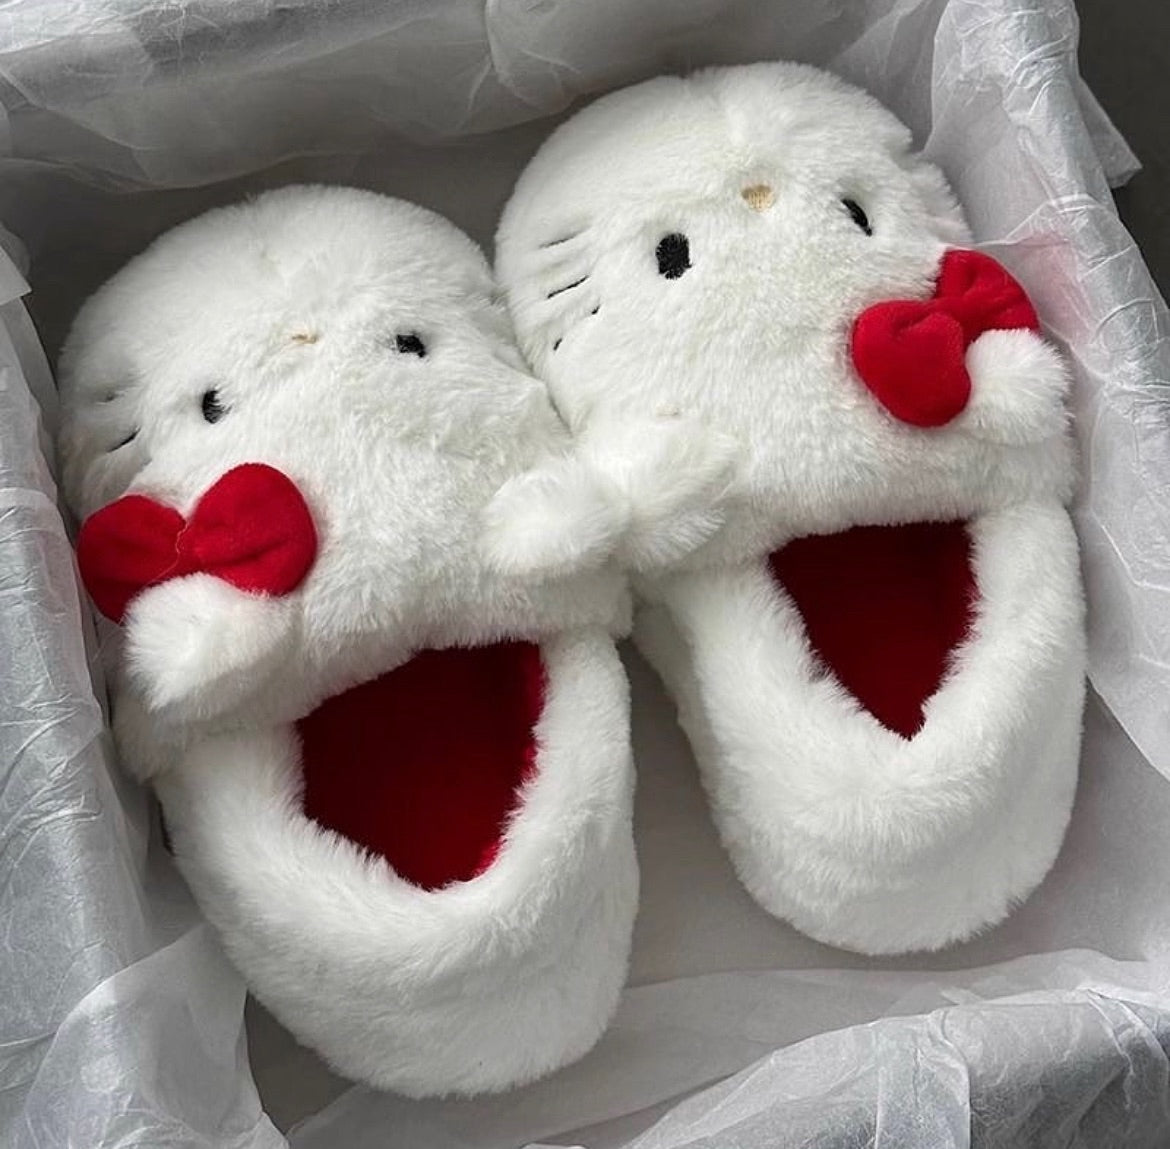 KITTY SLIPPERS